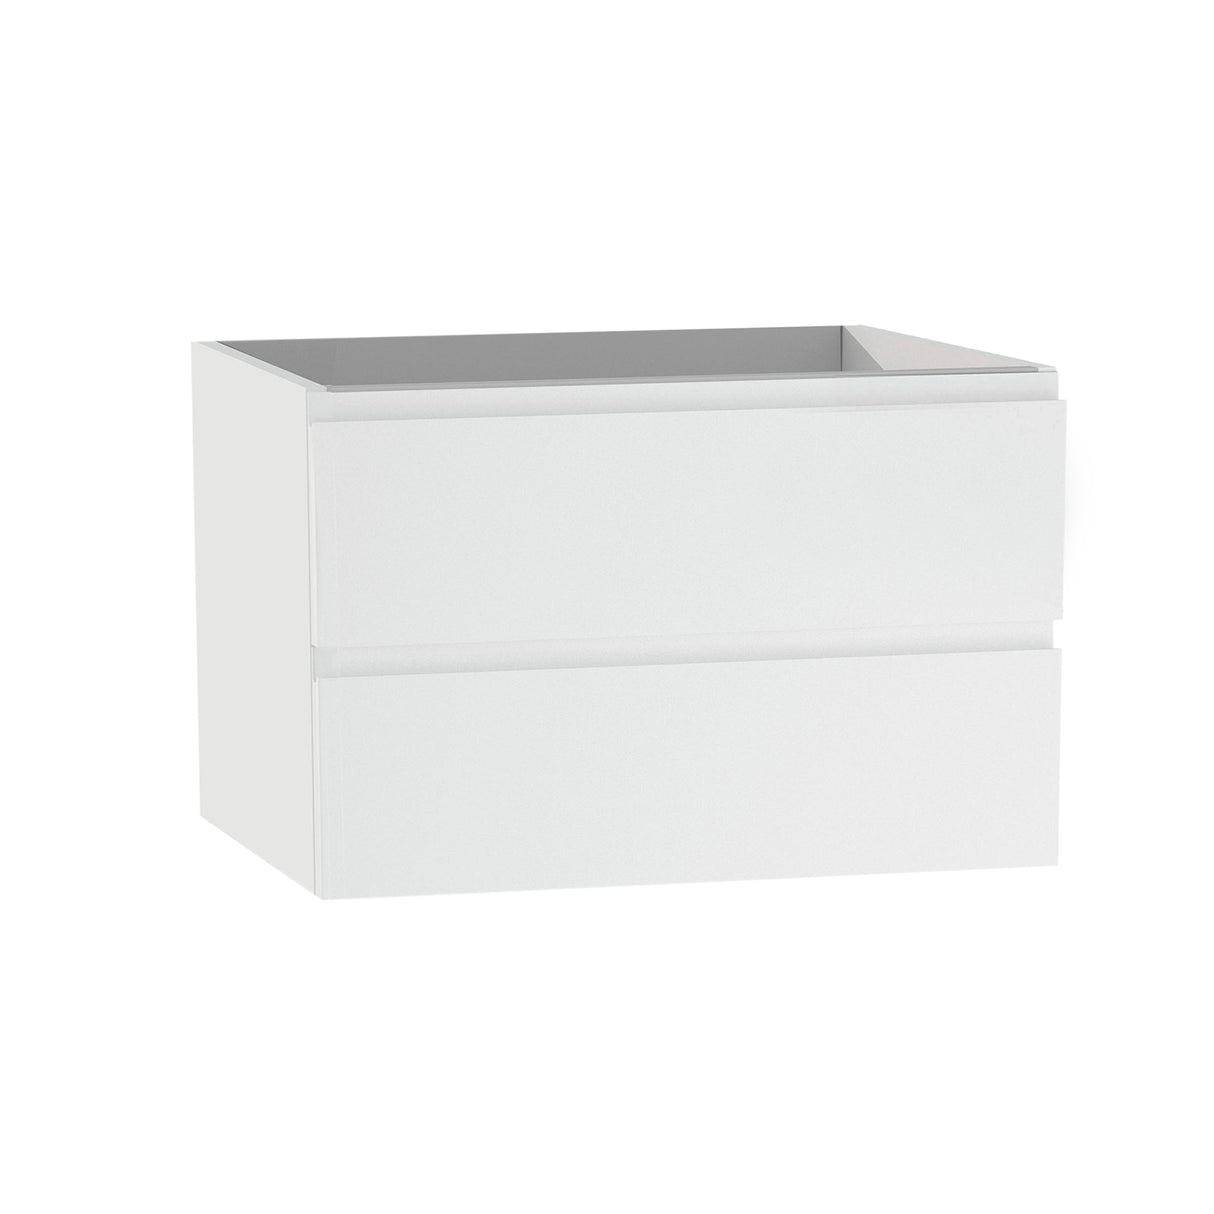 DAX Pasadena Engineered Wood and Porcelain Onix Basin with Single Vanity Cabinet, 28", Matte White DAX-PAS012827-ONX